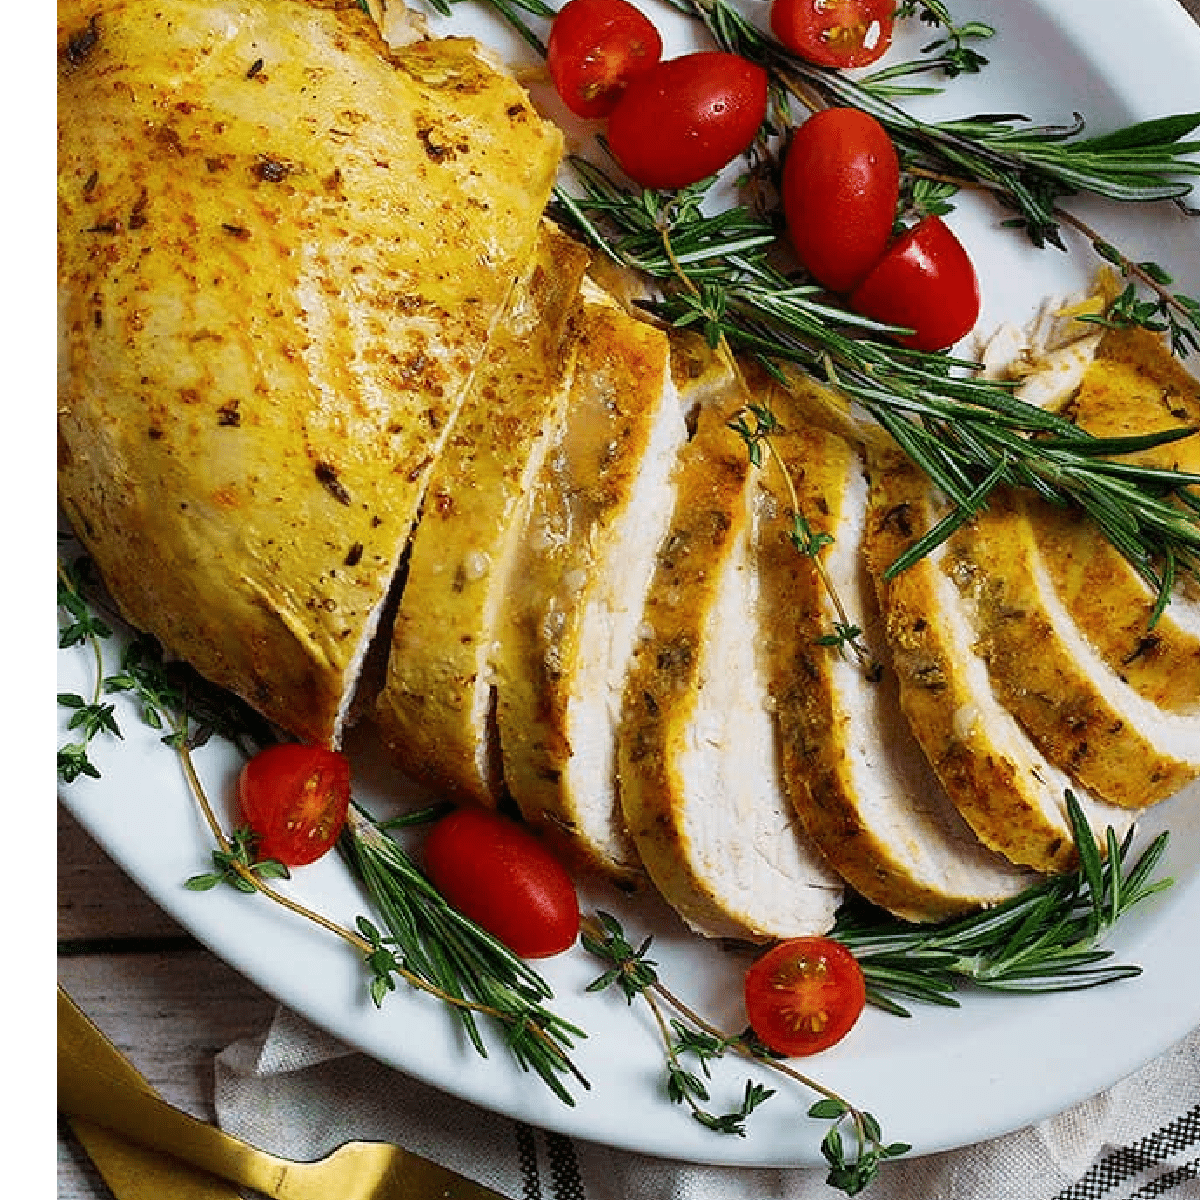 This slow cooker turkey breast recipe is a simple method that will always give you juicy and moist turkey breast with minimal preparation. It's perfect for Thanksgiving and the holidays!
